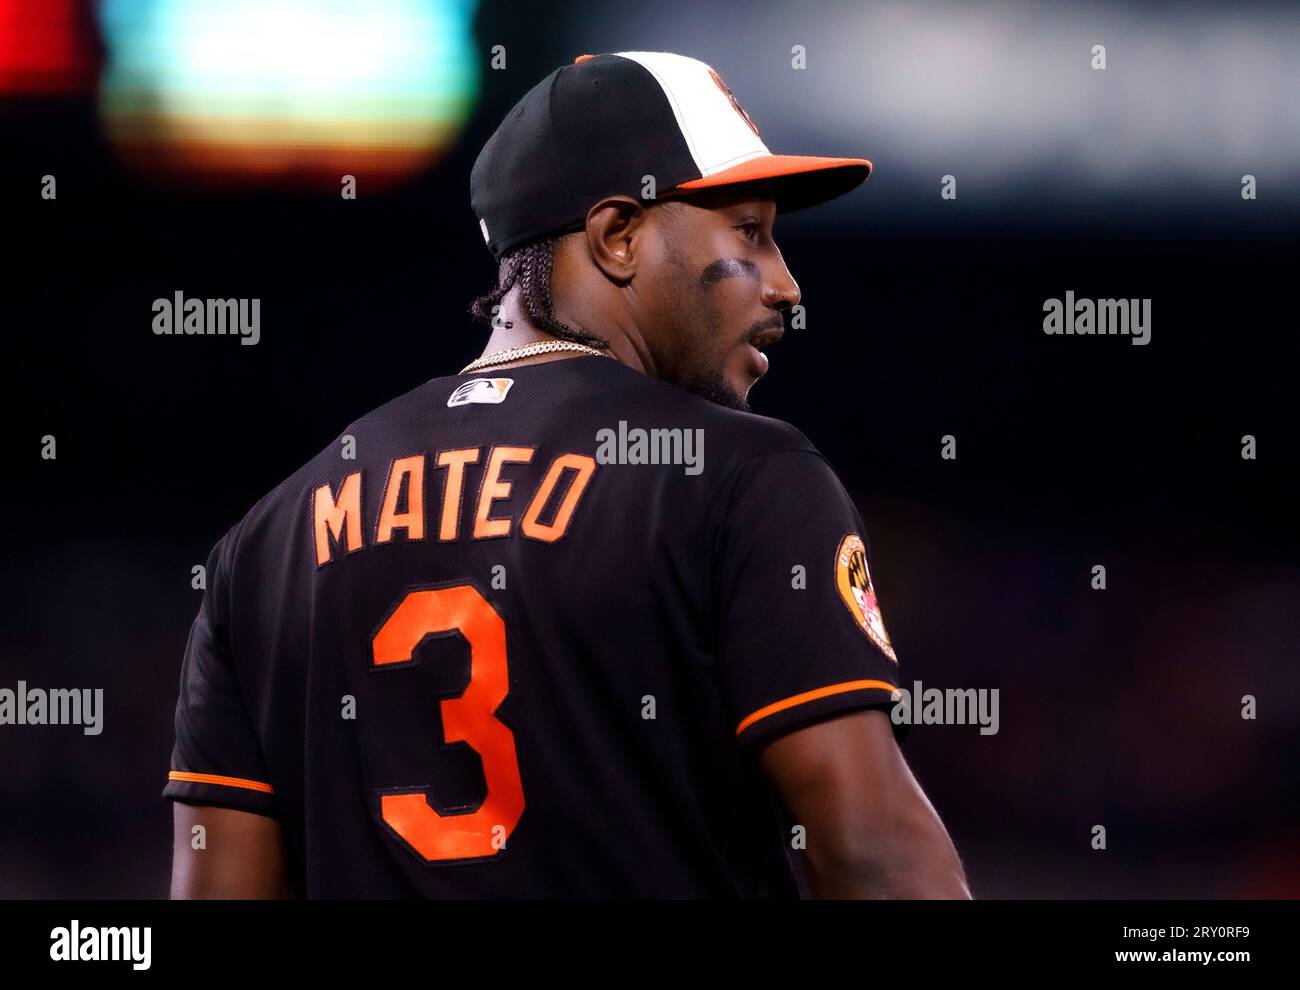 BALTIMORE, MD - SEPTEMBER 27: Baltimore Orioles shortstop Jorge Mateo (3)  returns to the field for a new inning during a MLB game between the  Baltimore Orioles and the Washington Nationals, on